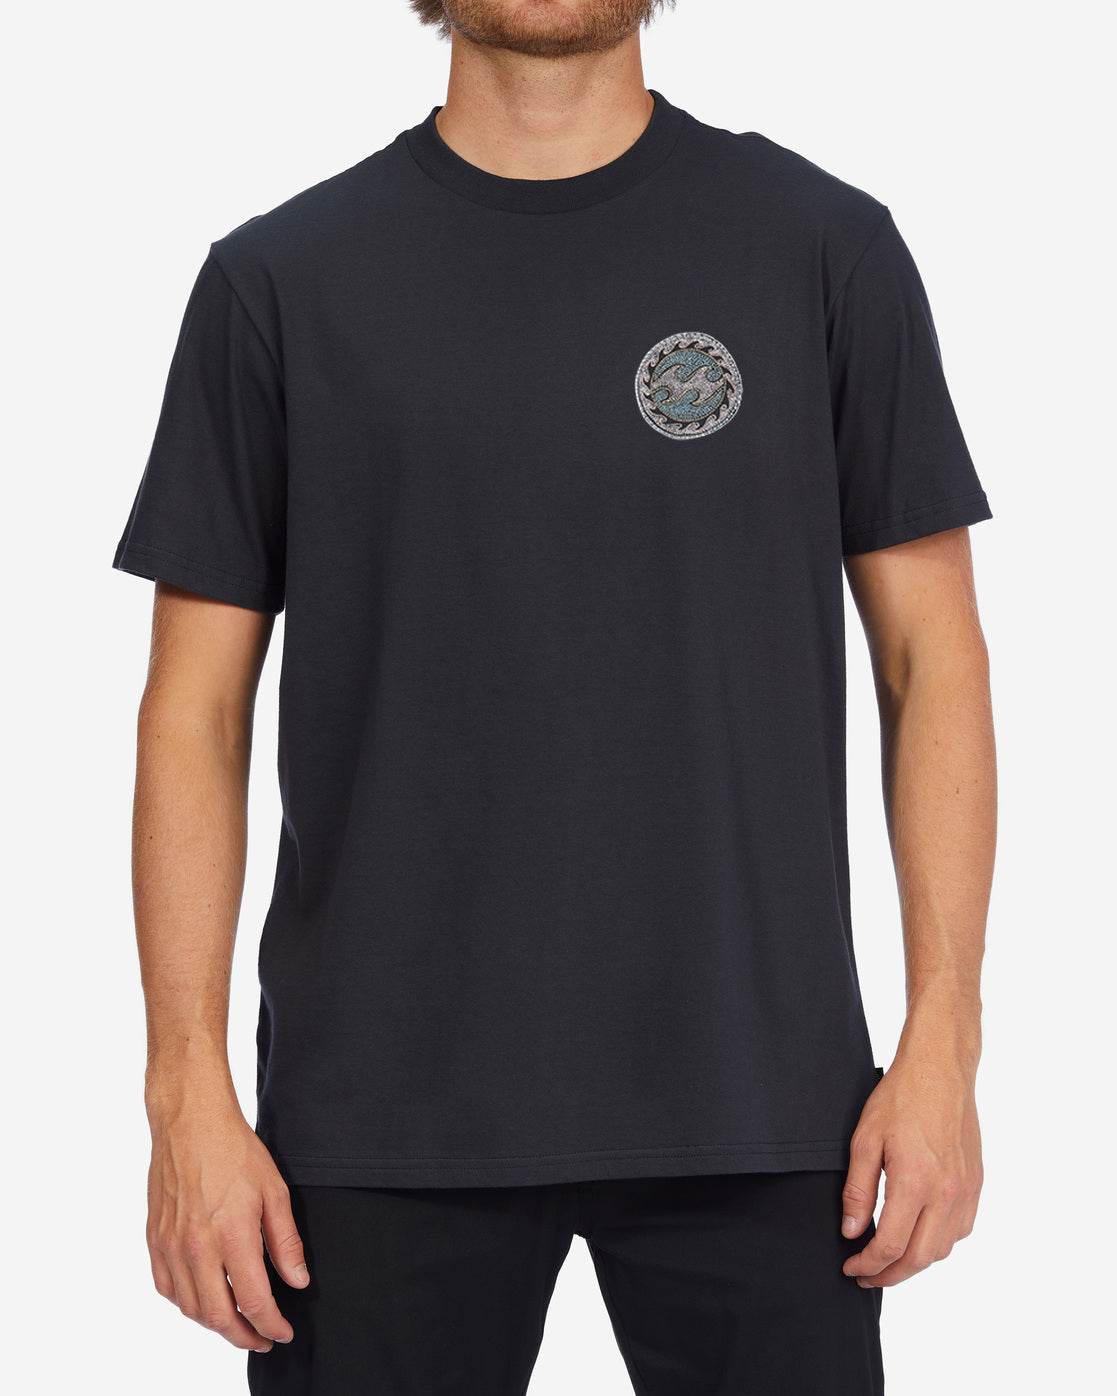 MENS CRAYON WAVE TEE - ABYZT01061